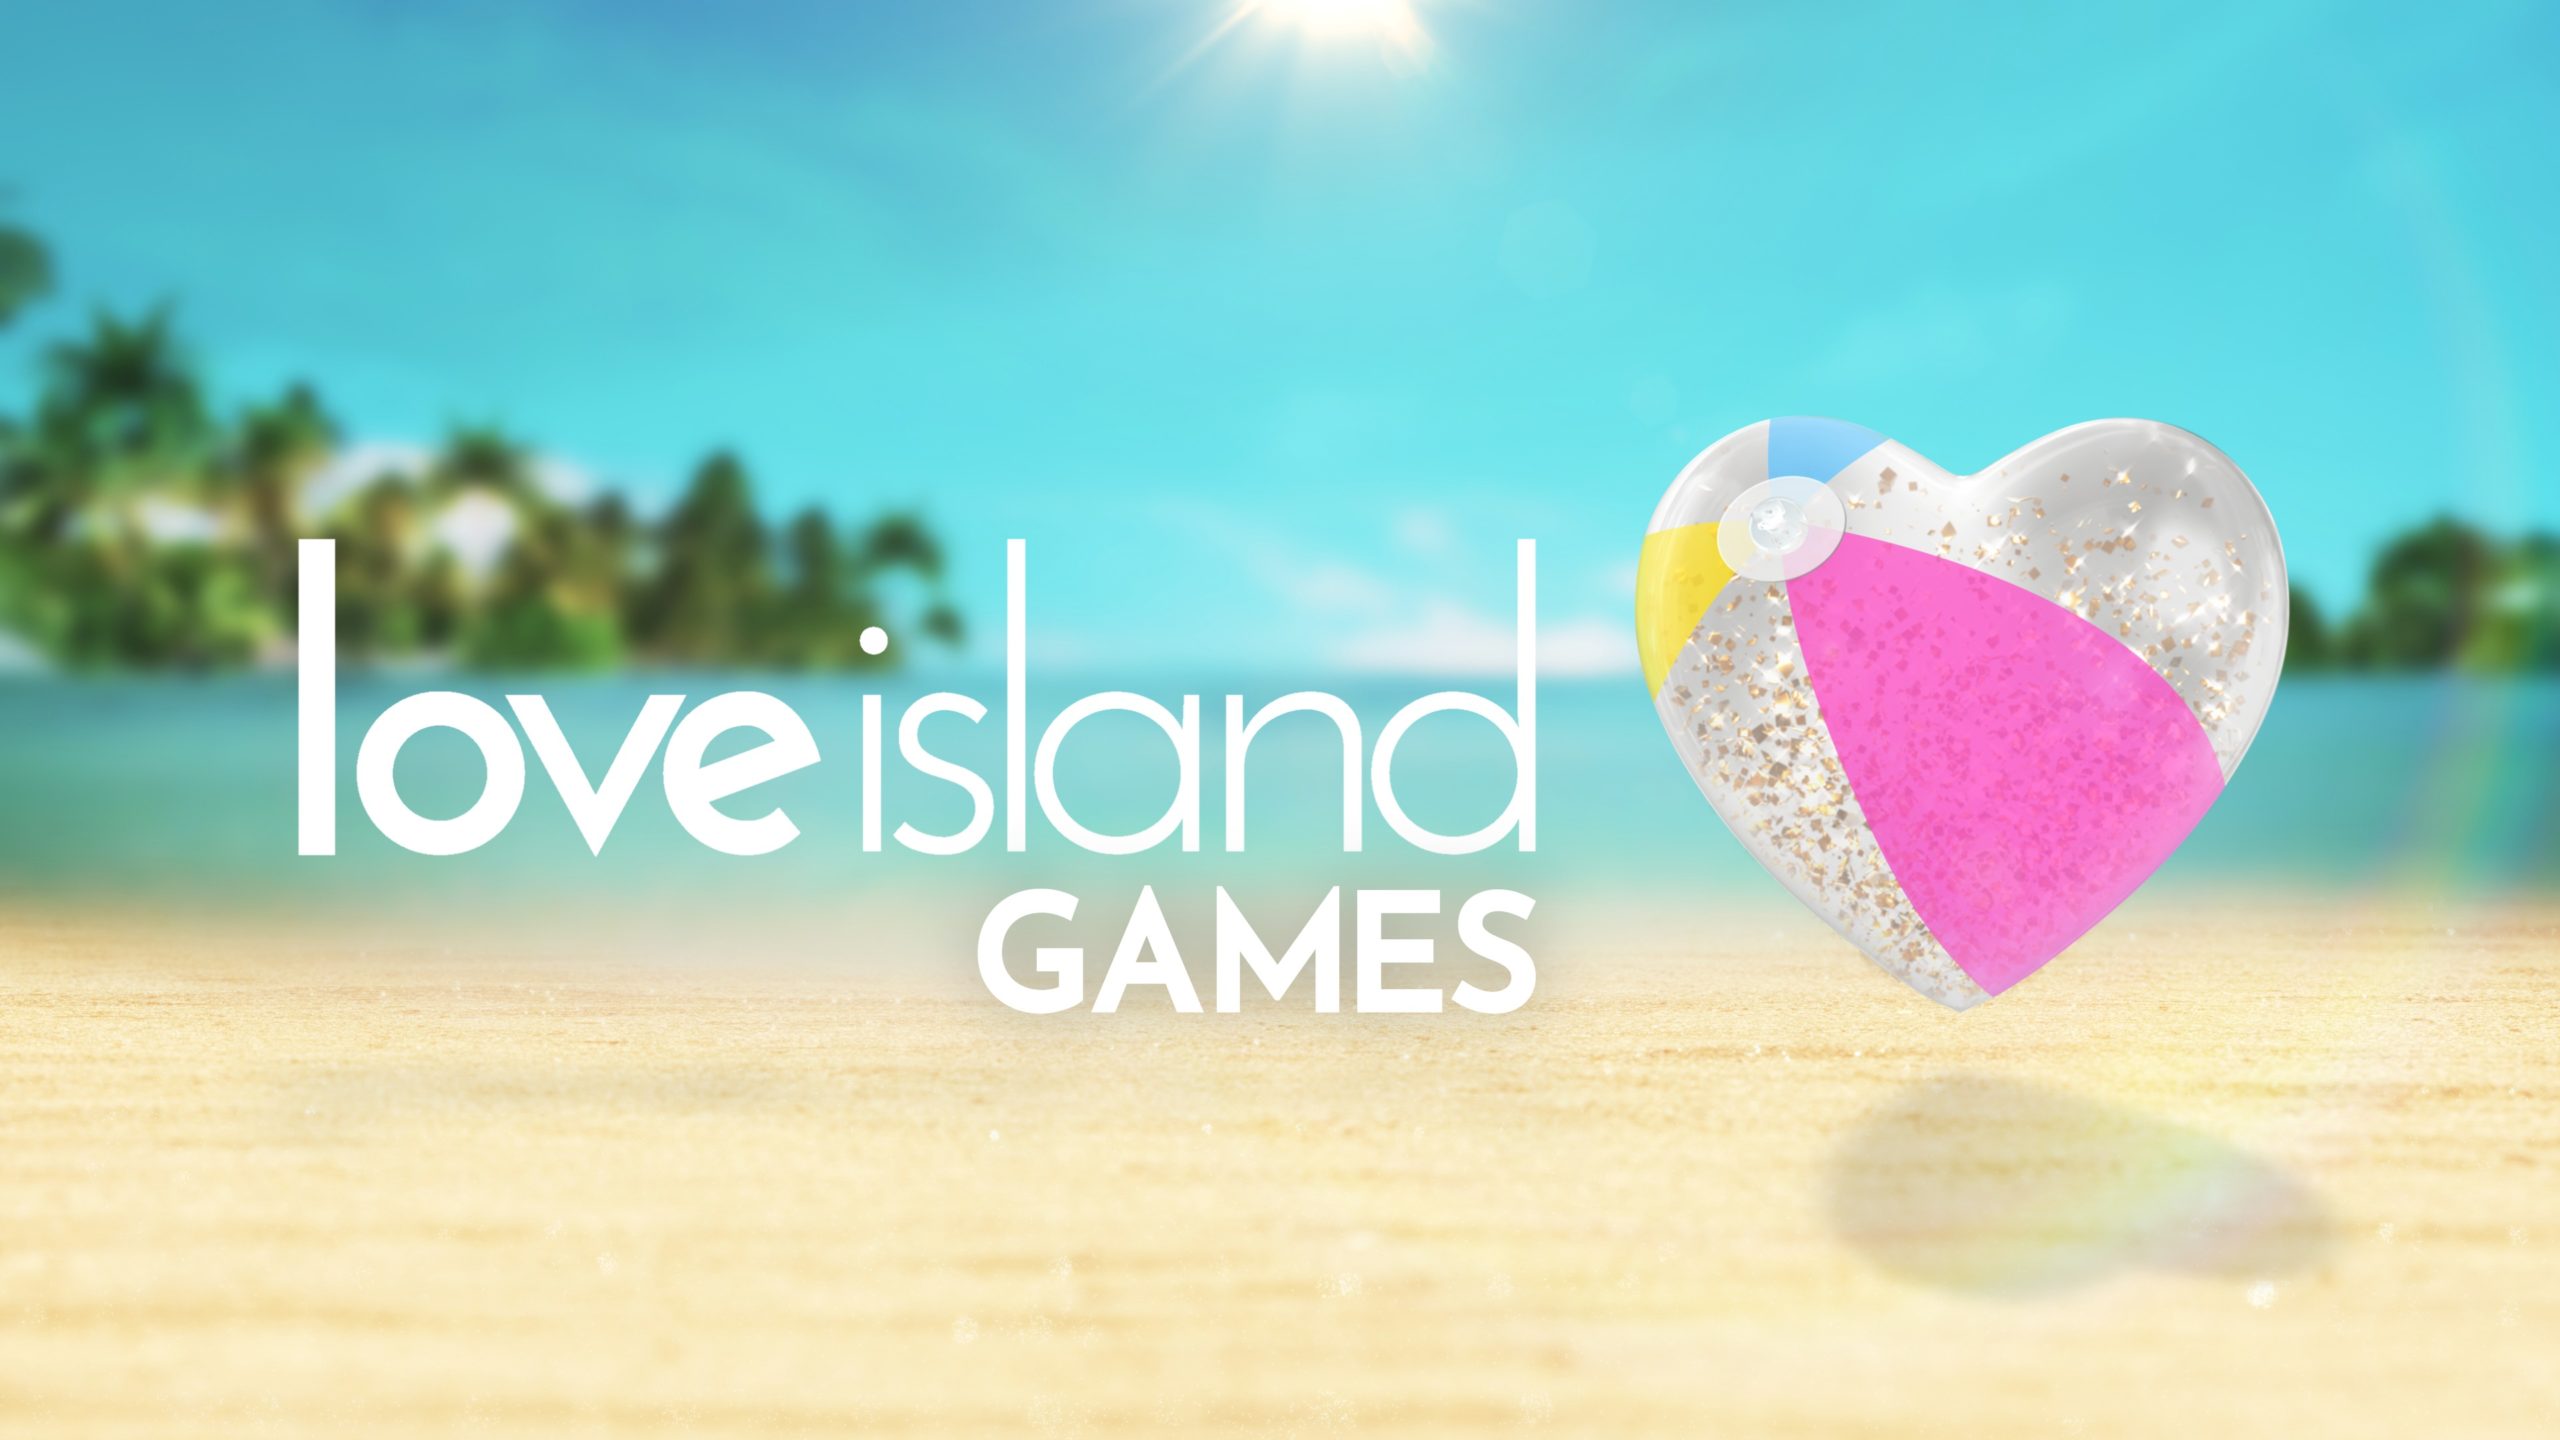 #Love Island Games: Peacock Reveals Cast, Trailer, and Premiere Date for Competition Series (Watch)